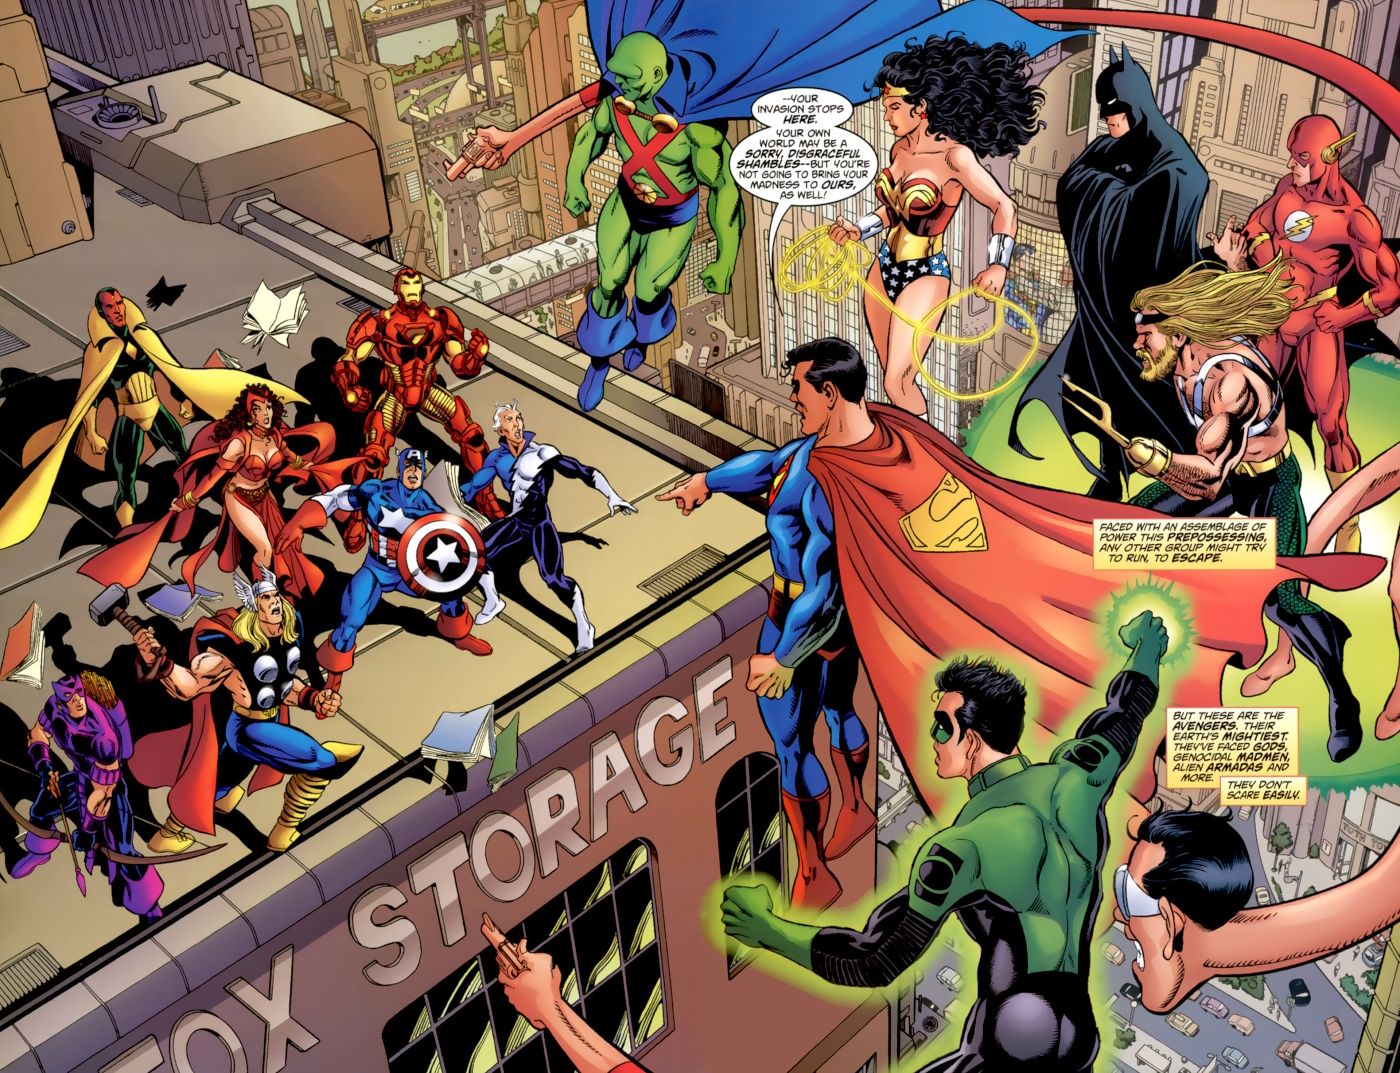 Comic book page: costumed superheroes from Marvel and DC face each other antagonistically.